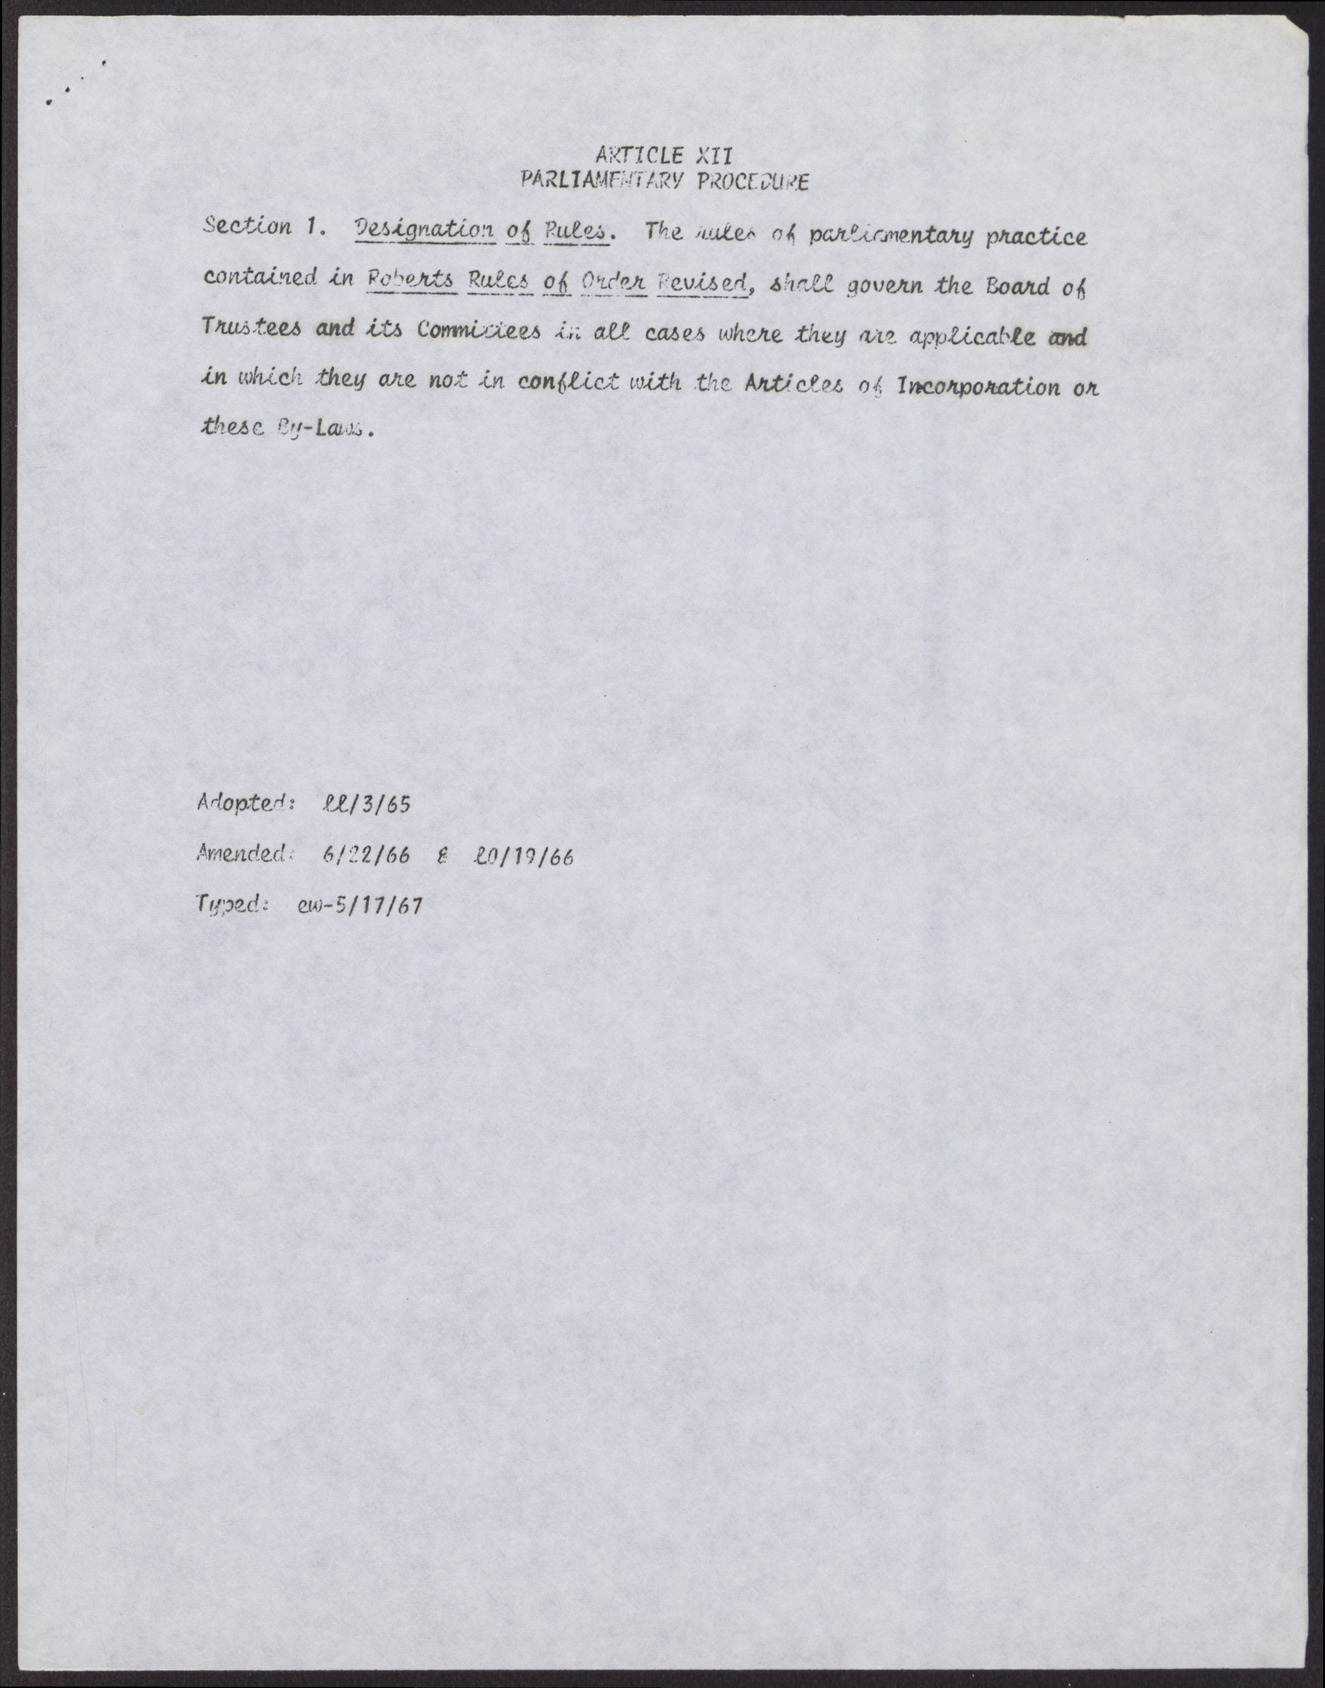 Operation Independence Incorporated Bylaws (9 pages), no date, page 9